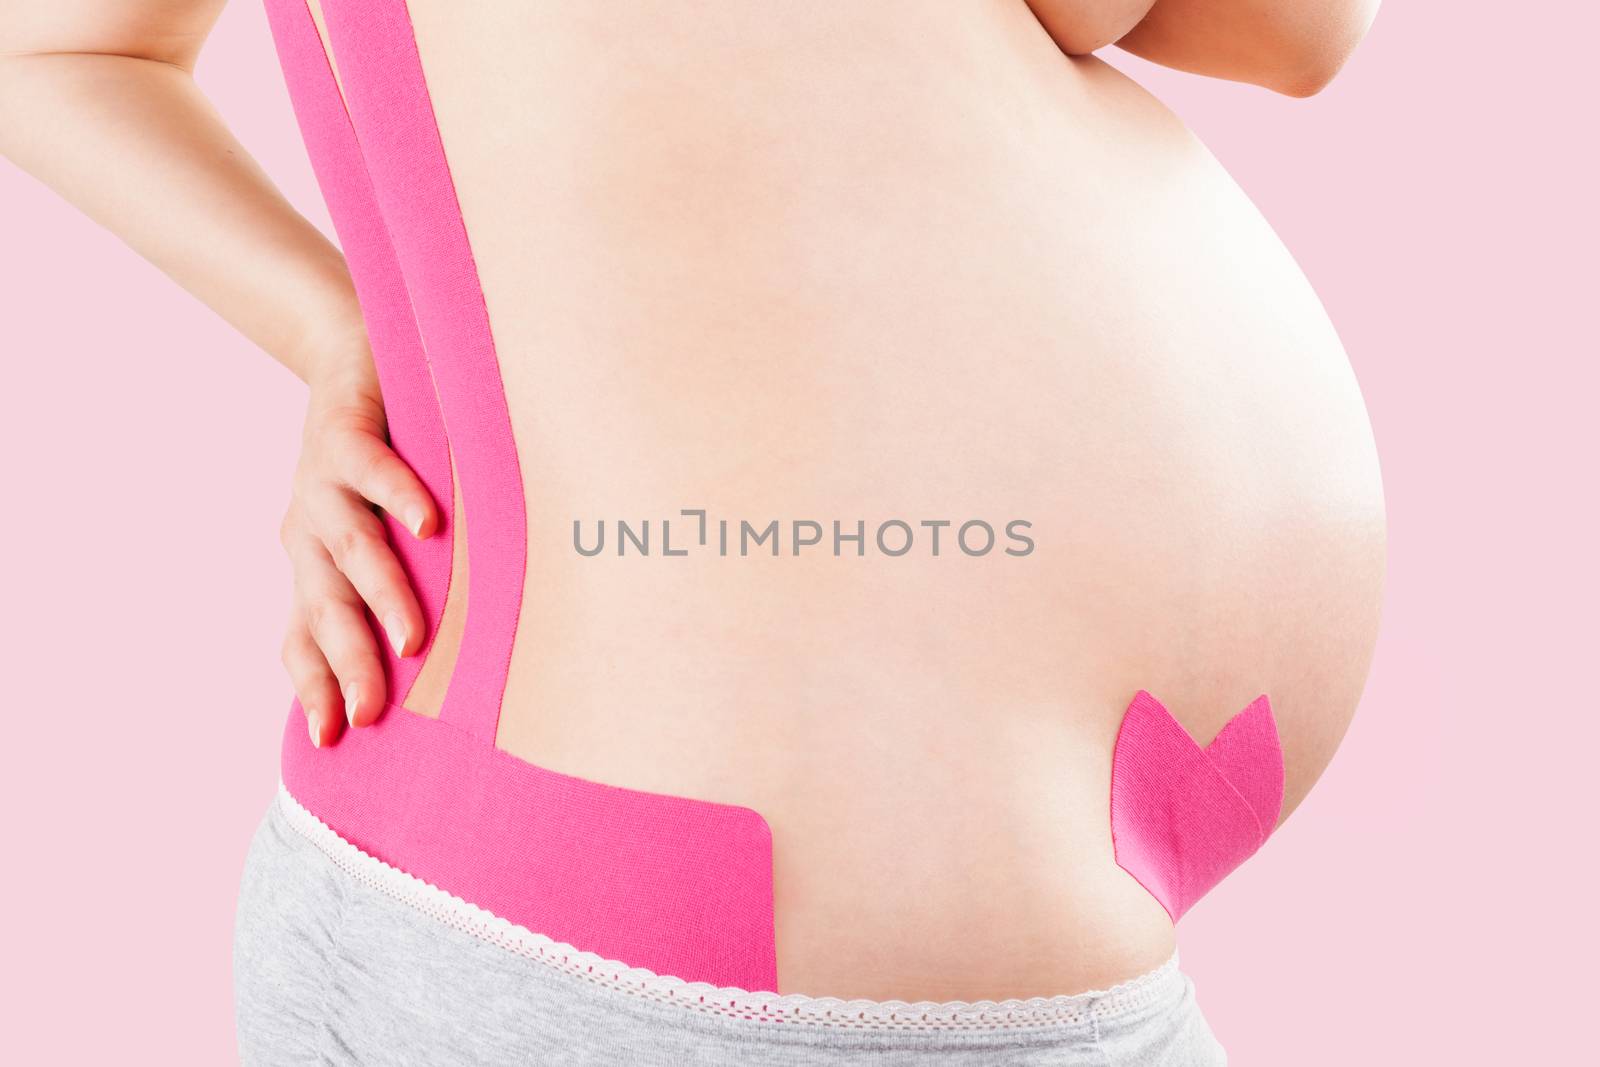 Beautiful pregnant woman with kinesio tape on her back. Back pain in pregnancy, alternative kinesio tape therapy.